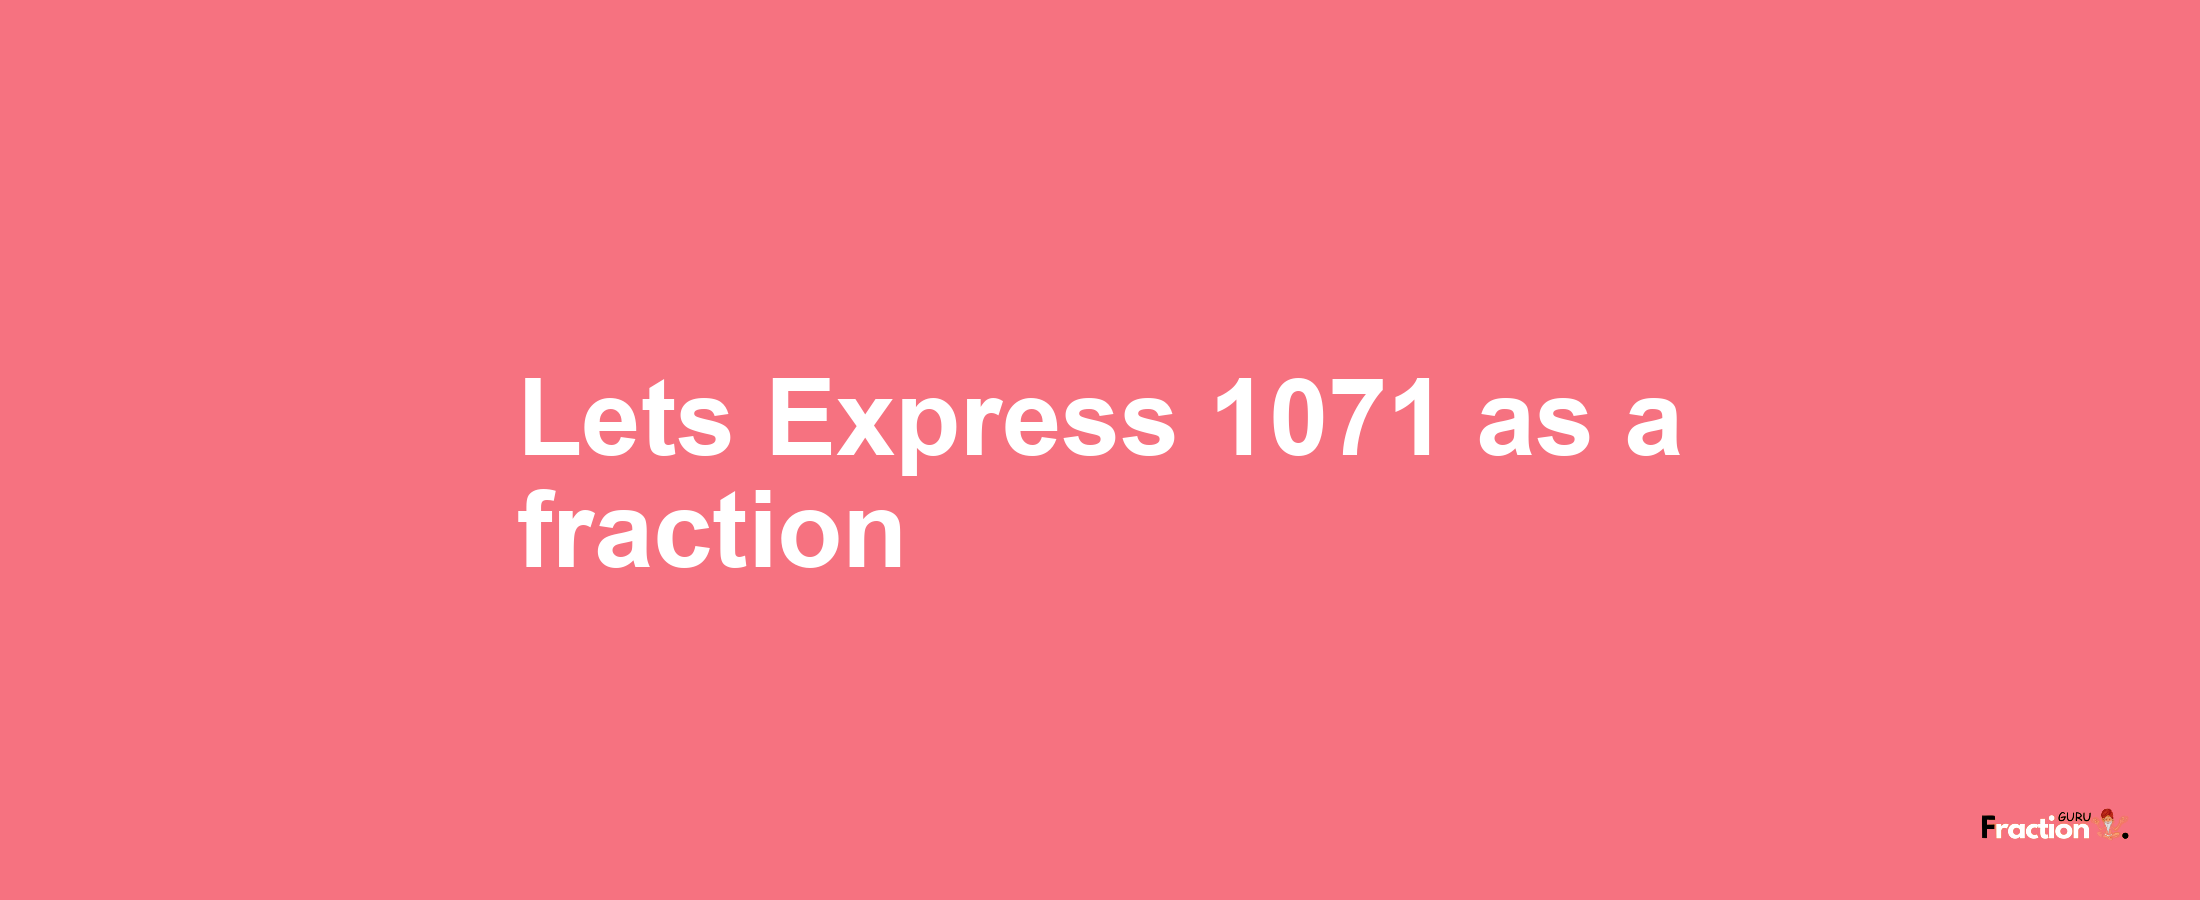 Lets Express 1071 as afraction